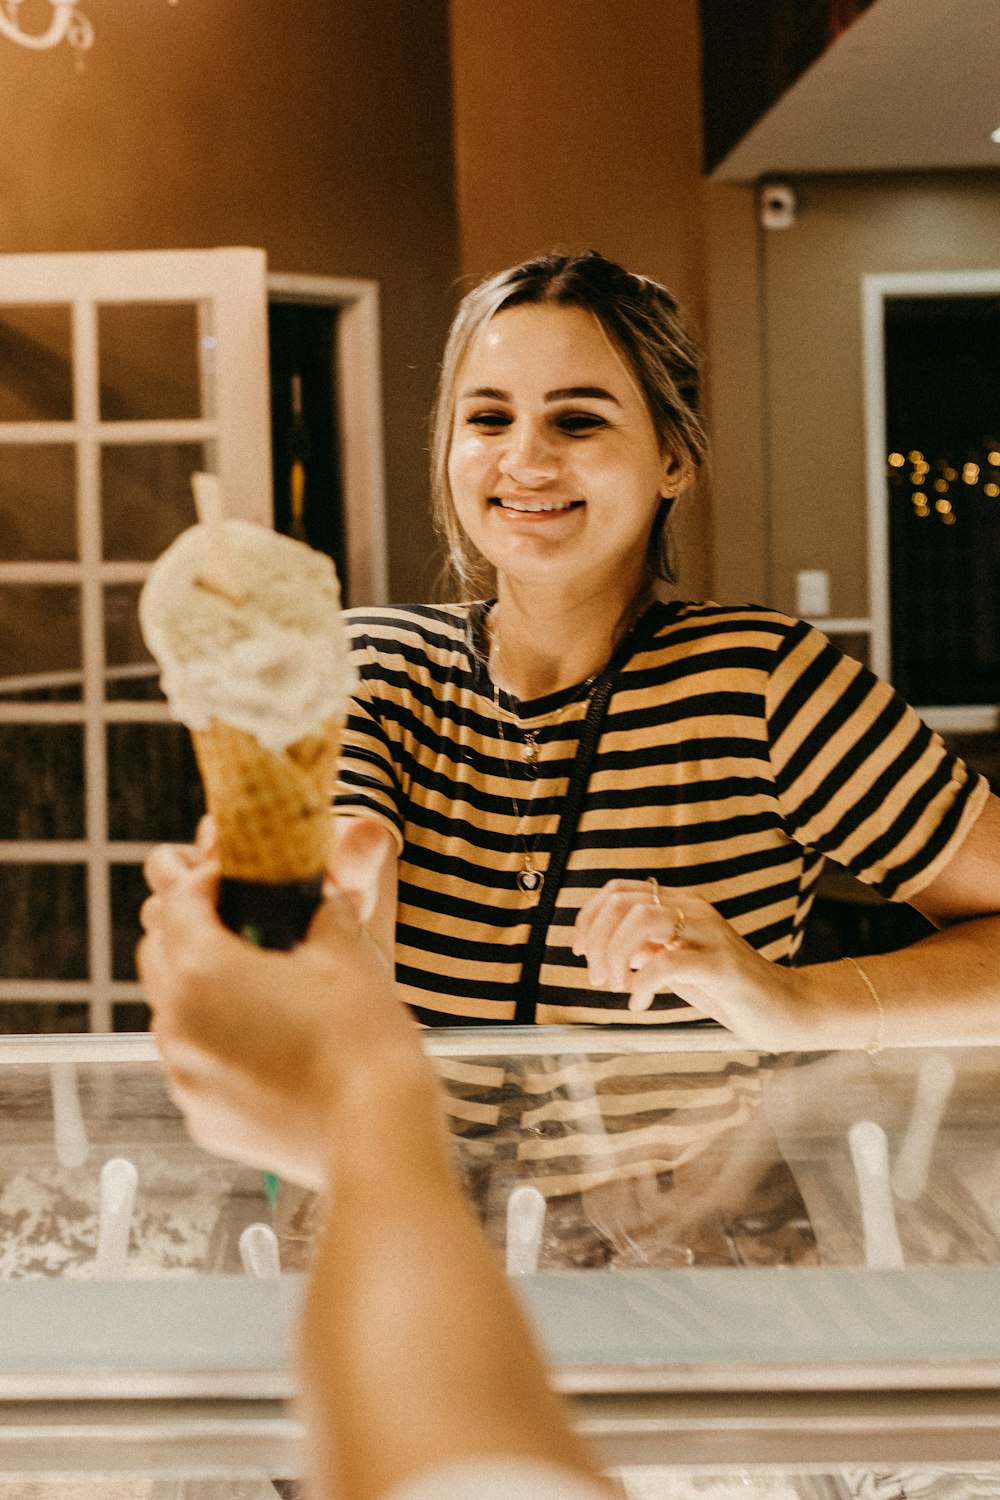 smiling woman reaching for ice cream